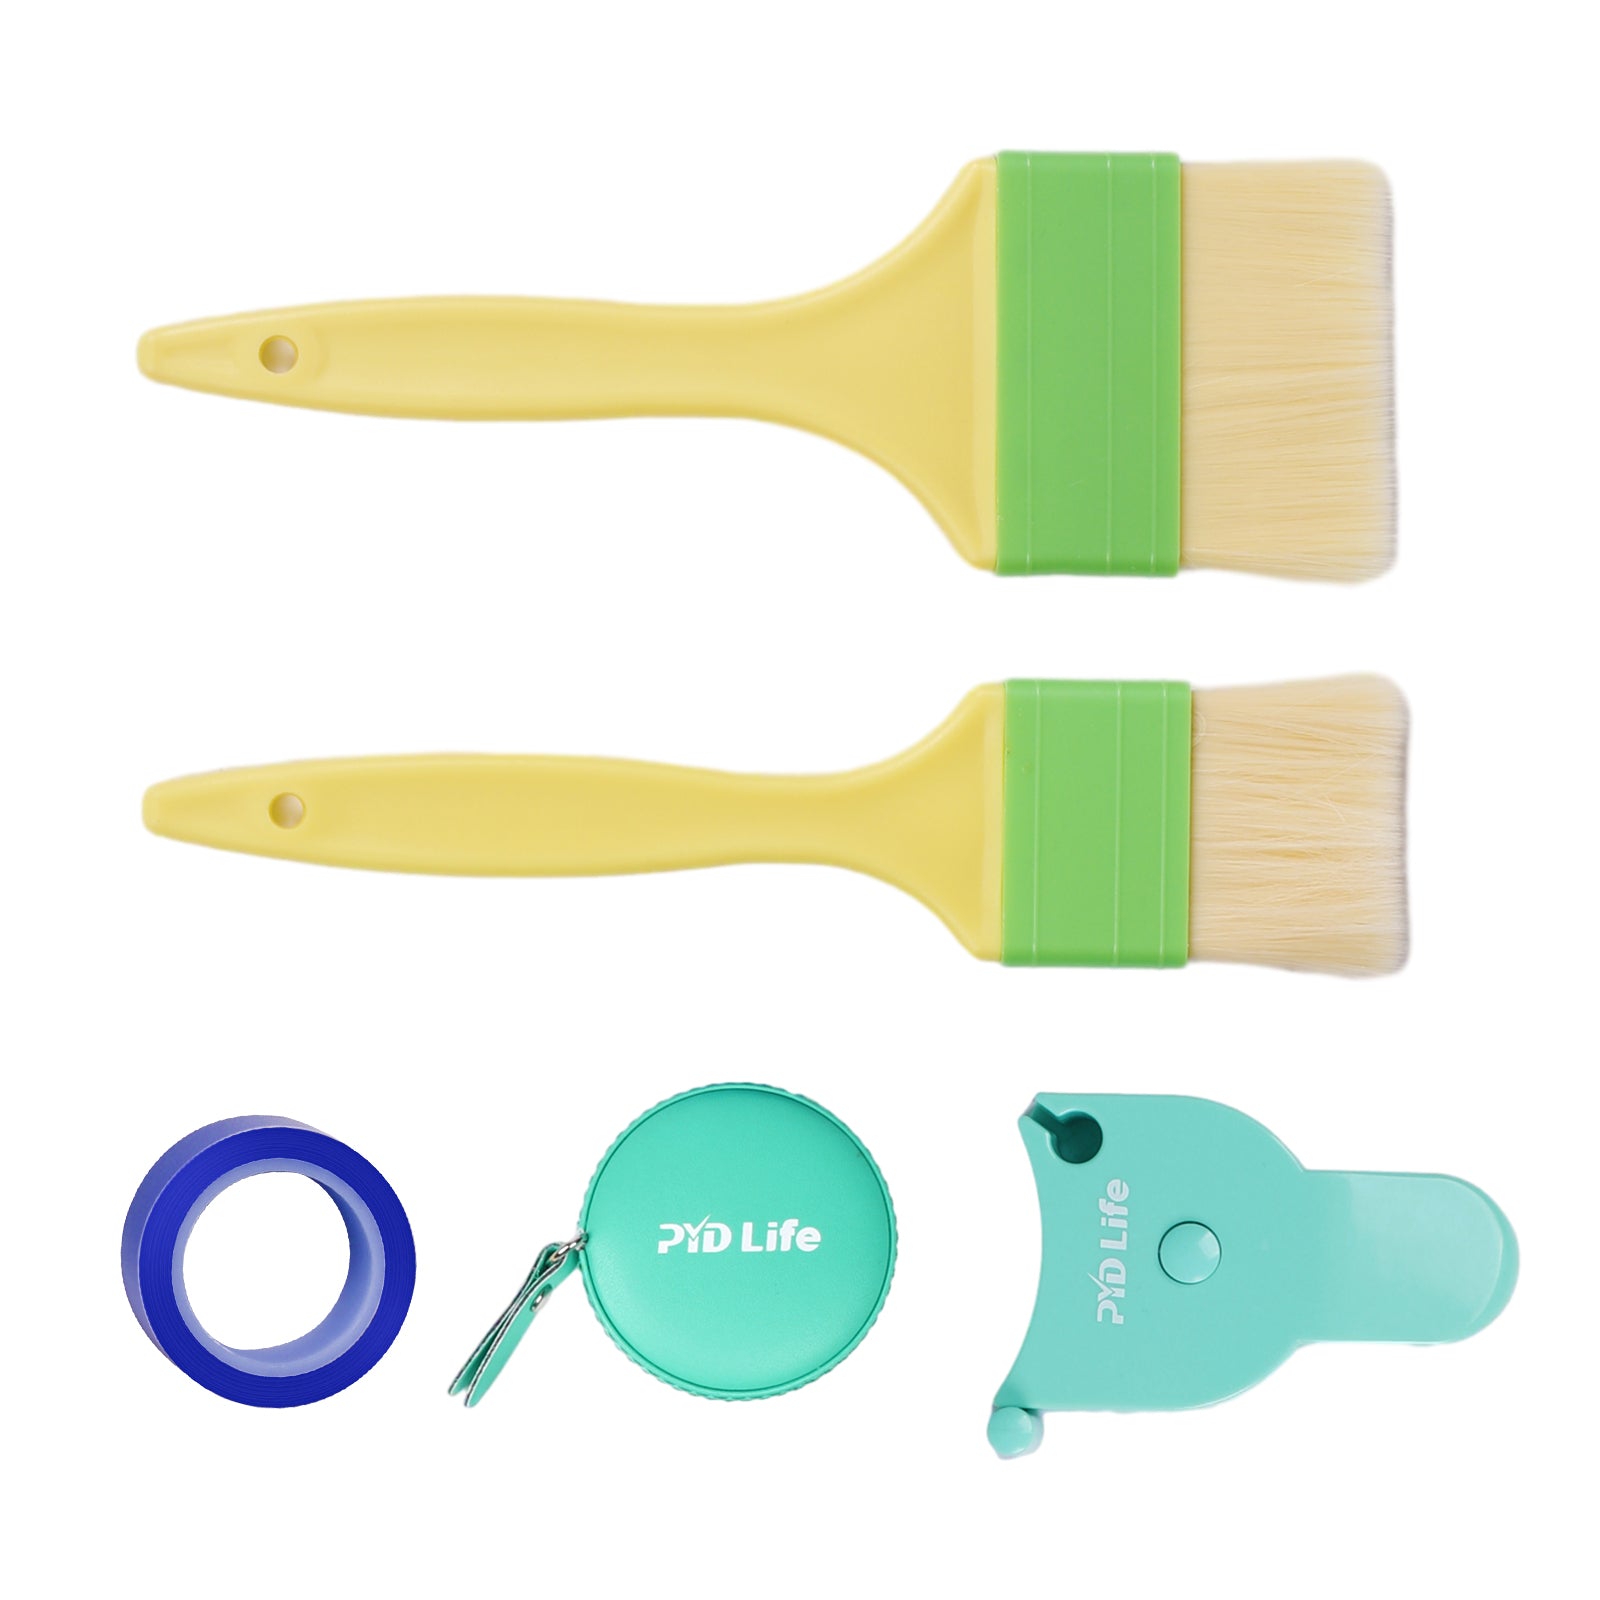 Sublimation Tools Accessories Kits (Tape, Brushes, Soft Rulers)